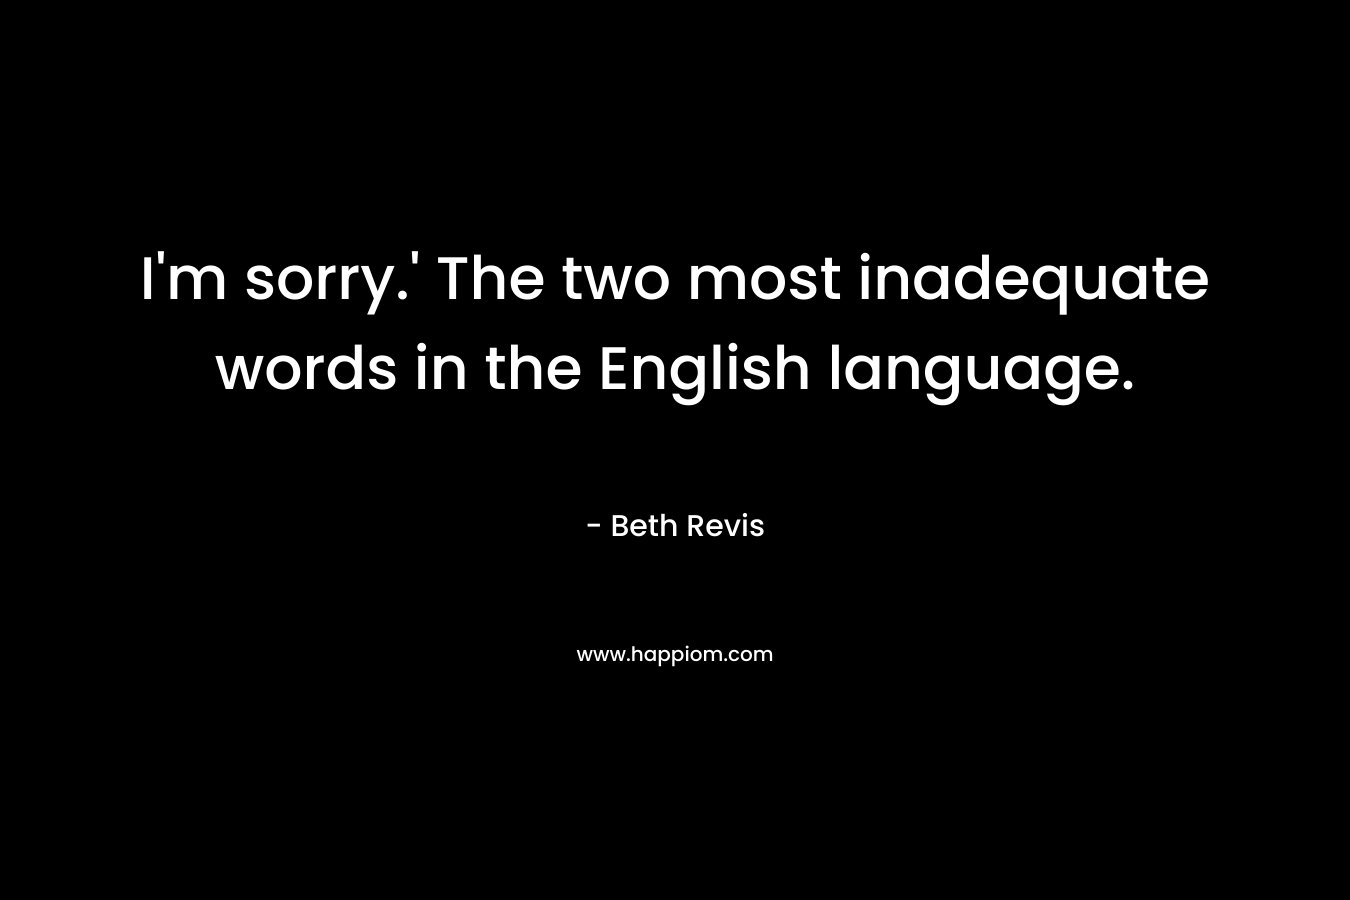 I'm sorry.' The two most inadequate words in the English language.